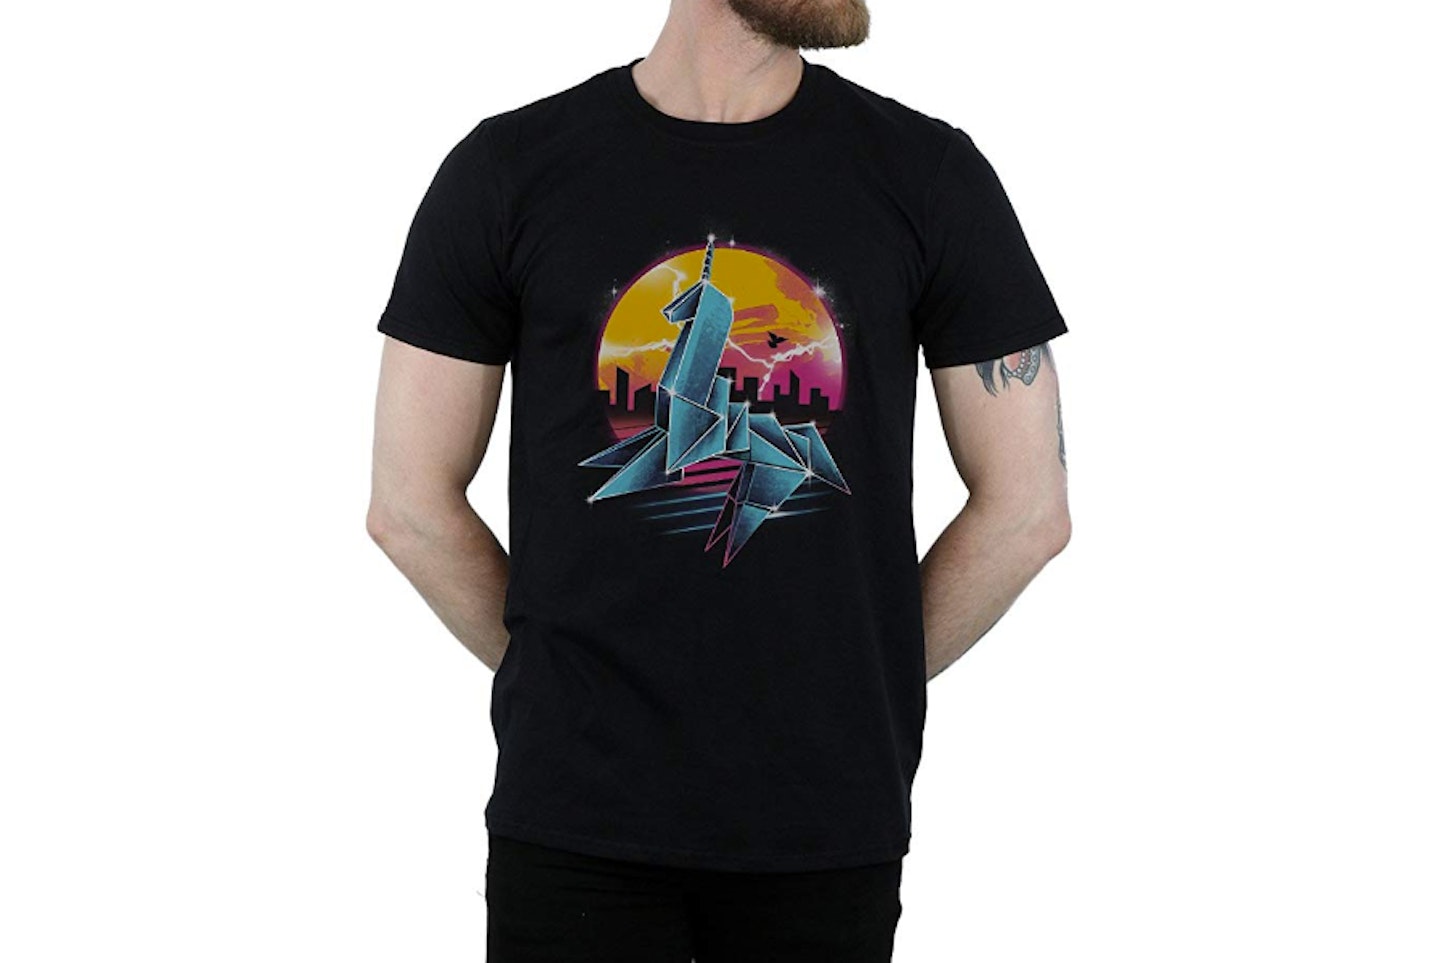 Blade Runner The Silver Origami T-Shirt, from £16.99